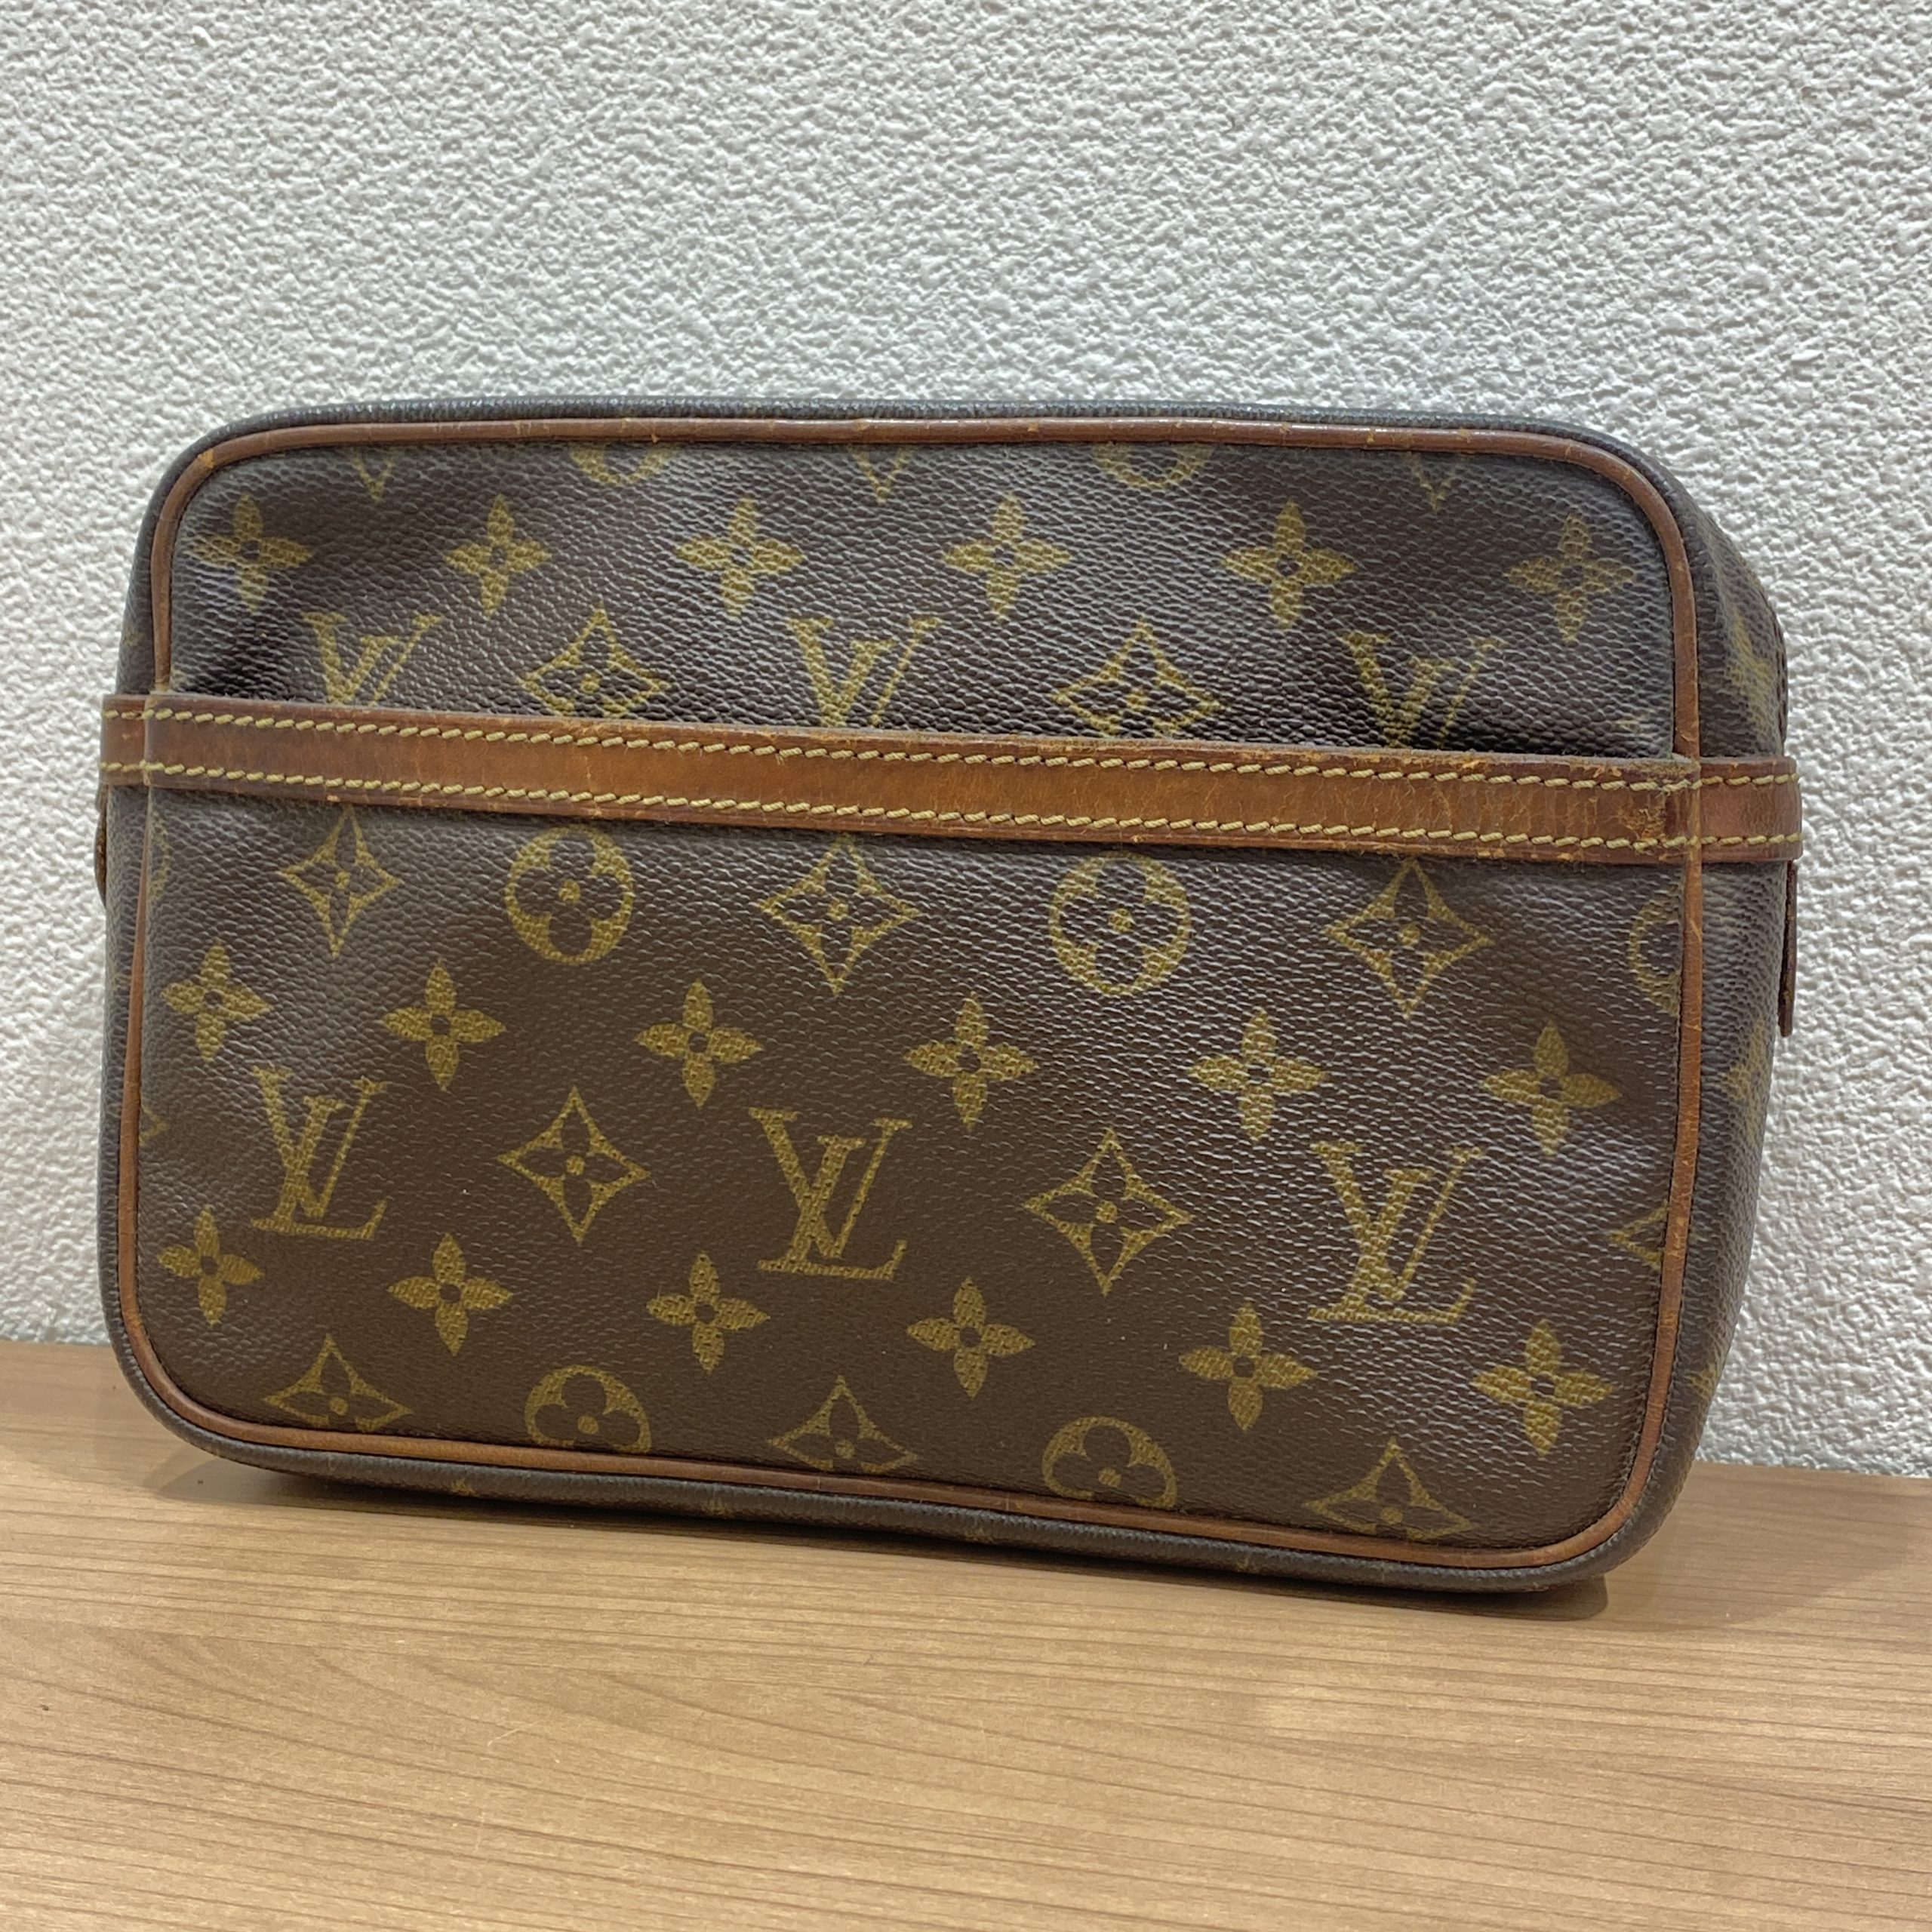 【LOUIS VUITTON/ルイヴィトン】モノグラム コンピエーニュ23 M51845